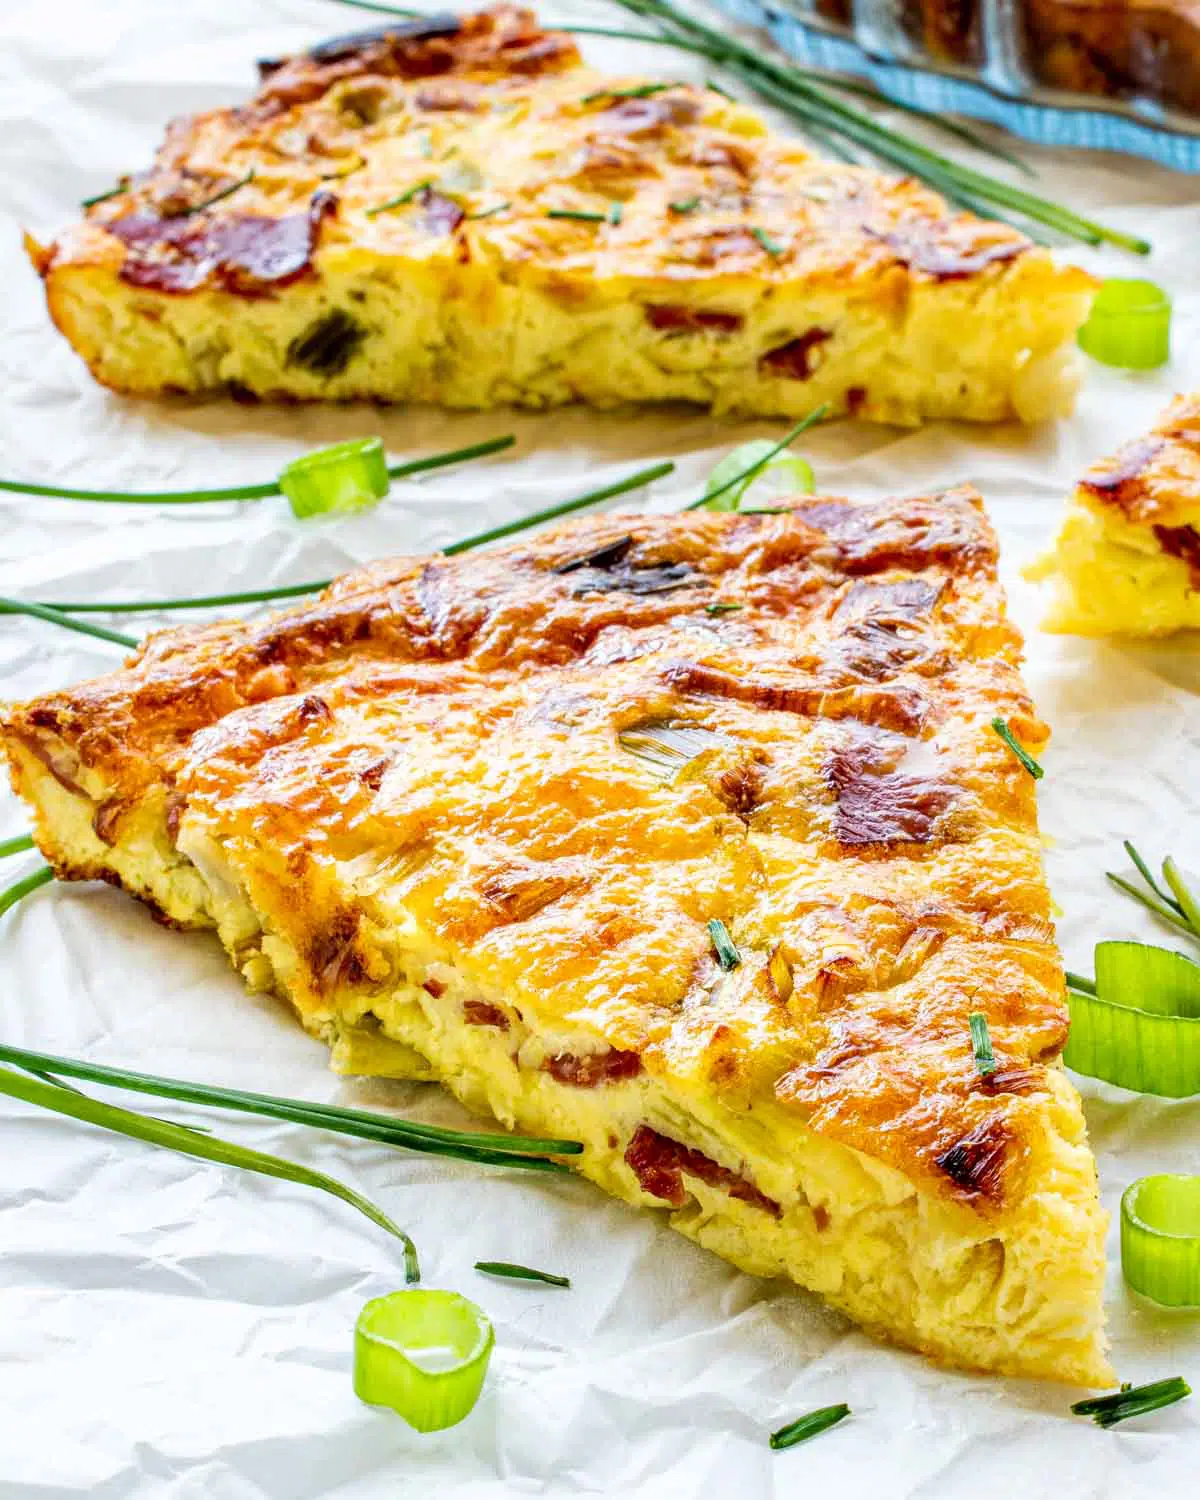 a slice of crustless quiche garnished with green onions.